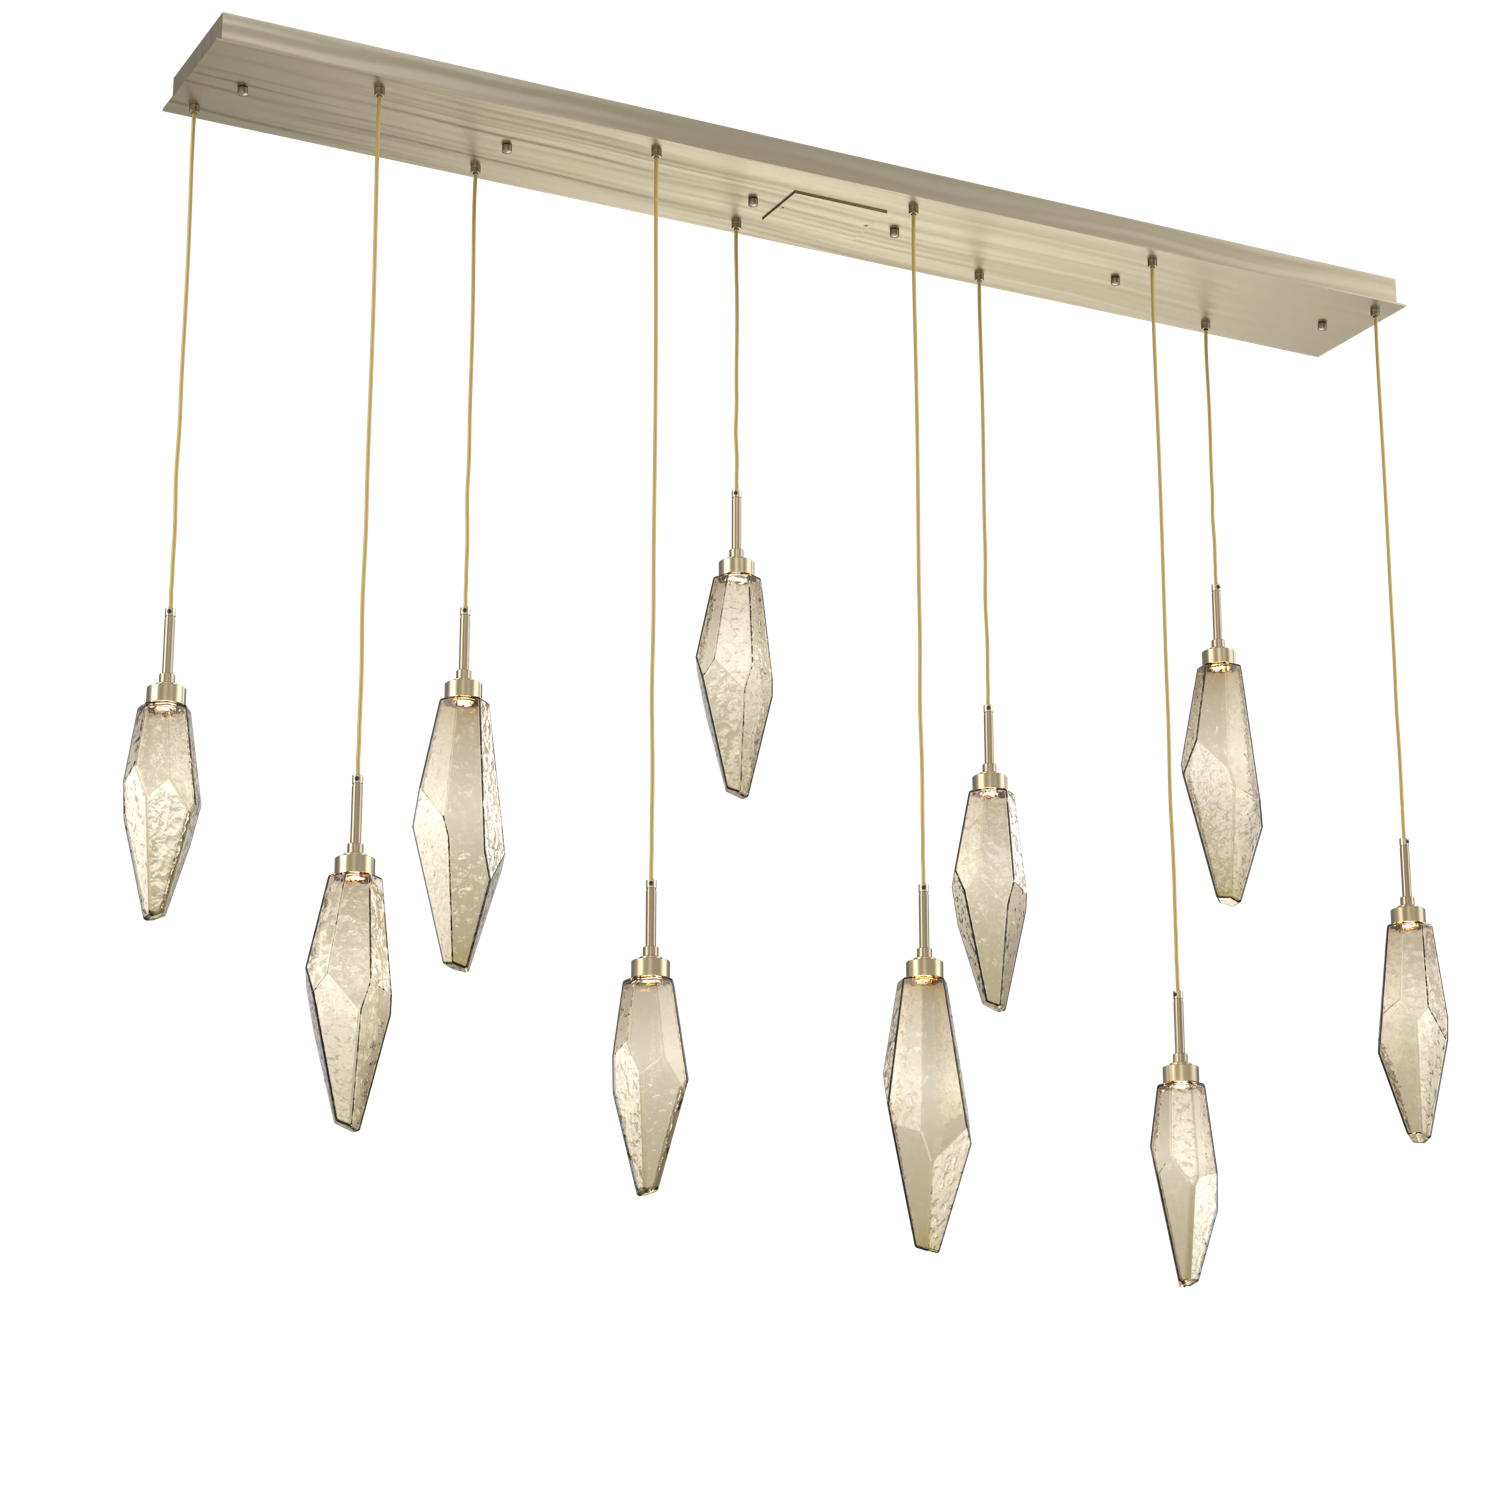 PLB0050-10-HB-CB-Hammerton-Studio-Rock-Crystal-10-light-linear-pendant-chandelier-with-heritage-brass-finish-and-chilled-bronze-blown-glass-shades-and-LED-lamping